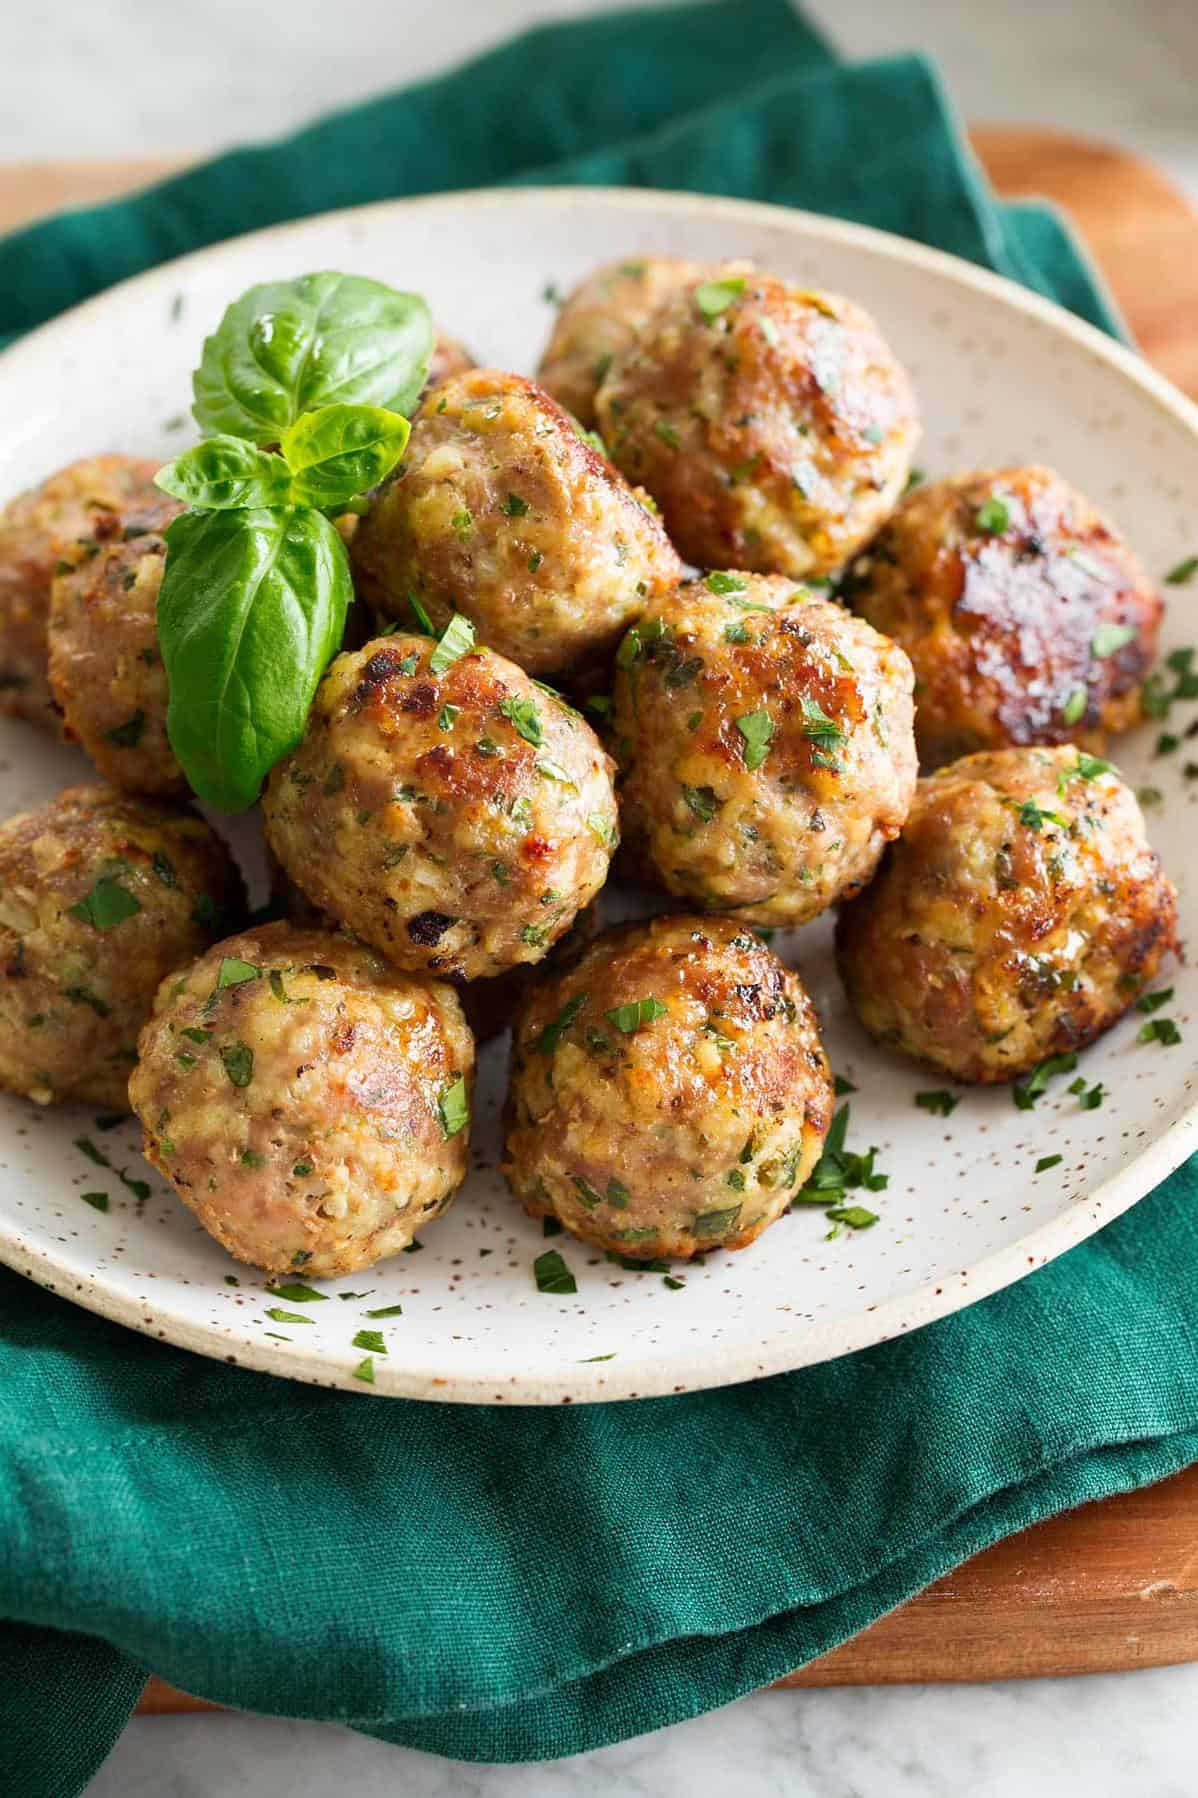  A picture-perfect moment of these mouthwatering meatballs - to taste or not to taste?